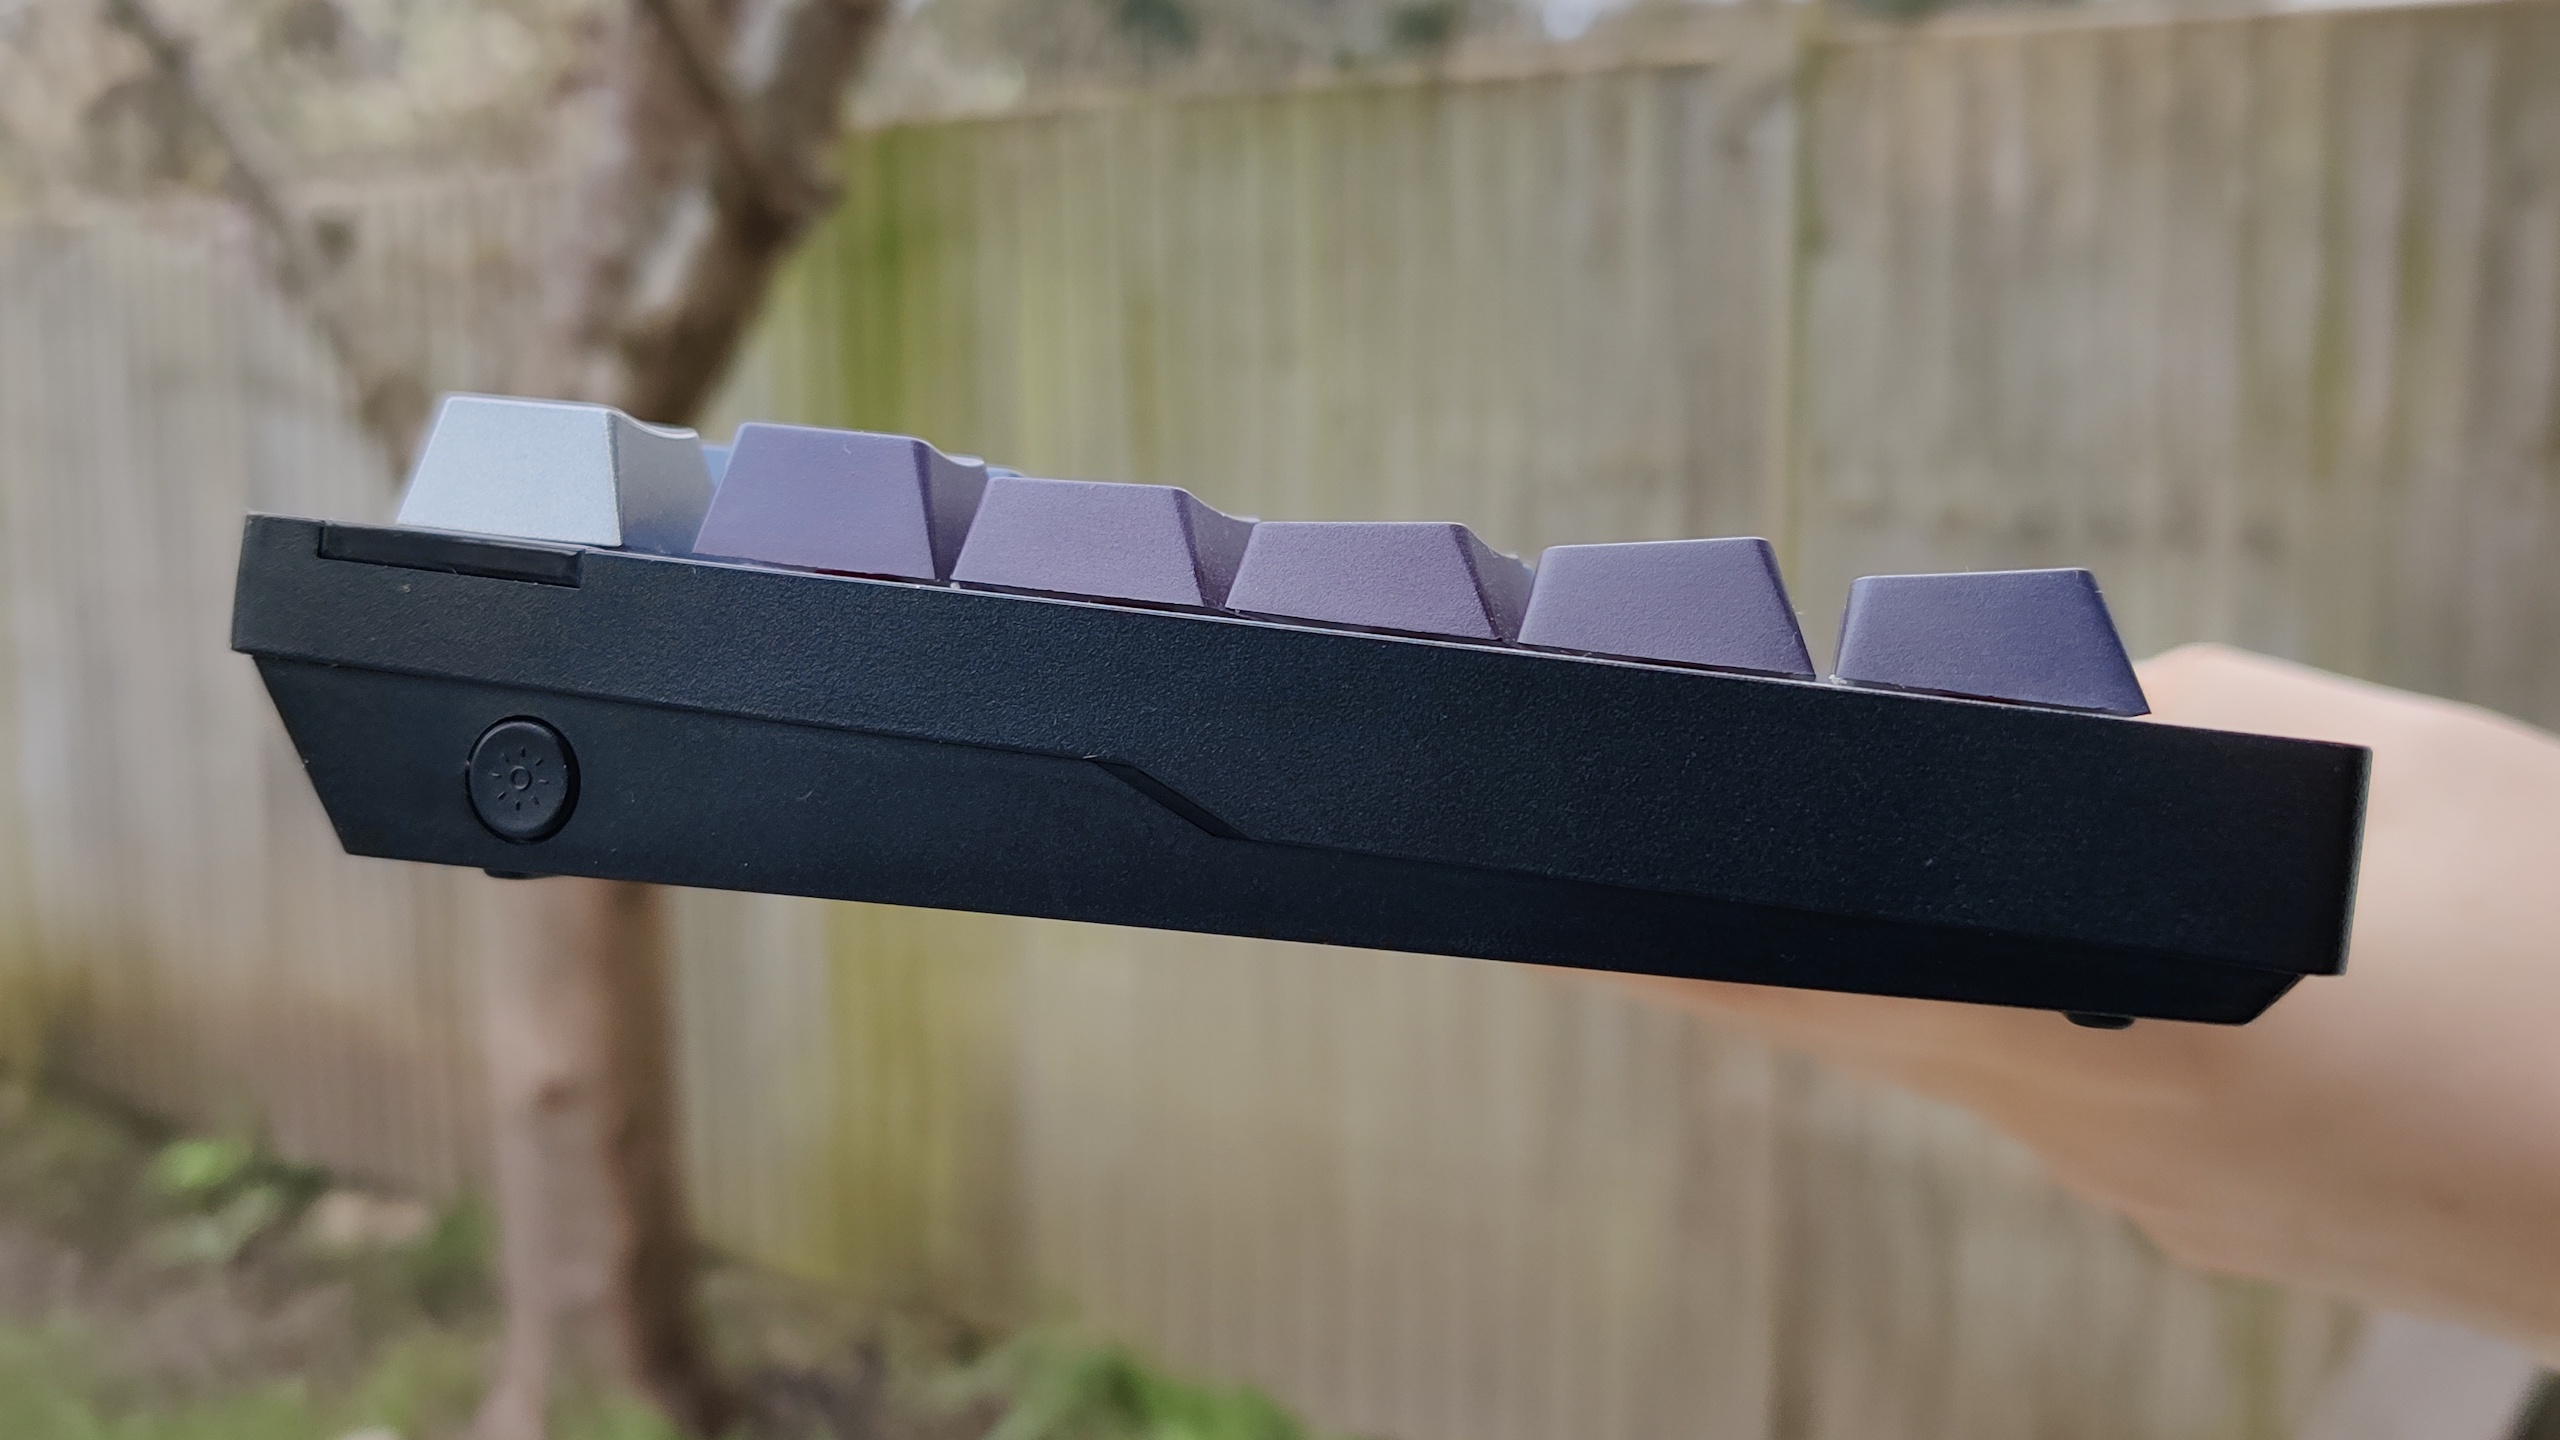 Corsair K65 pictured outdoors with black and grey keycaps.